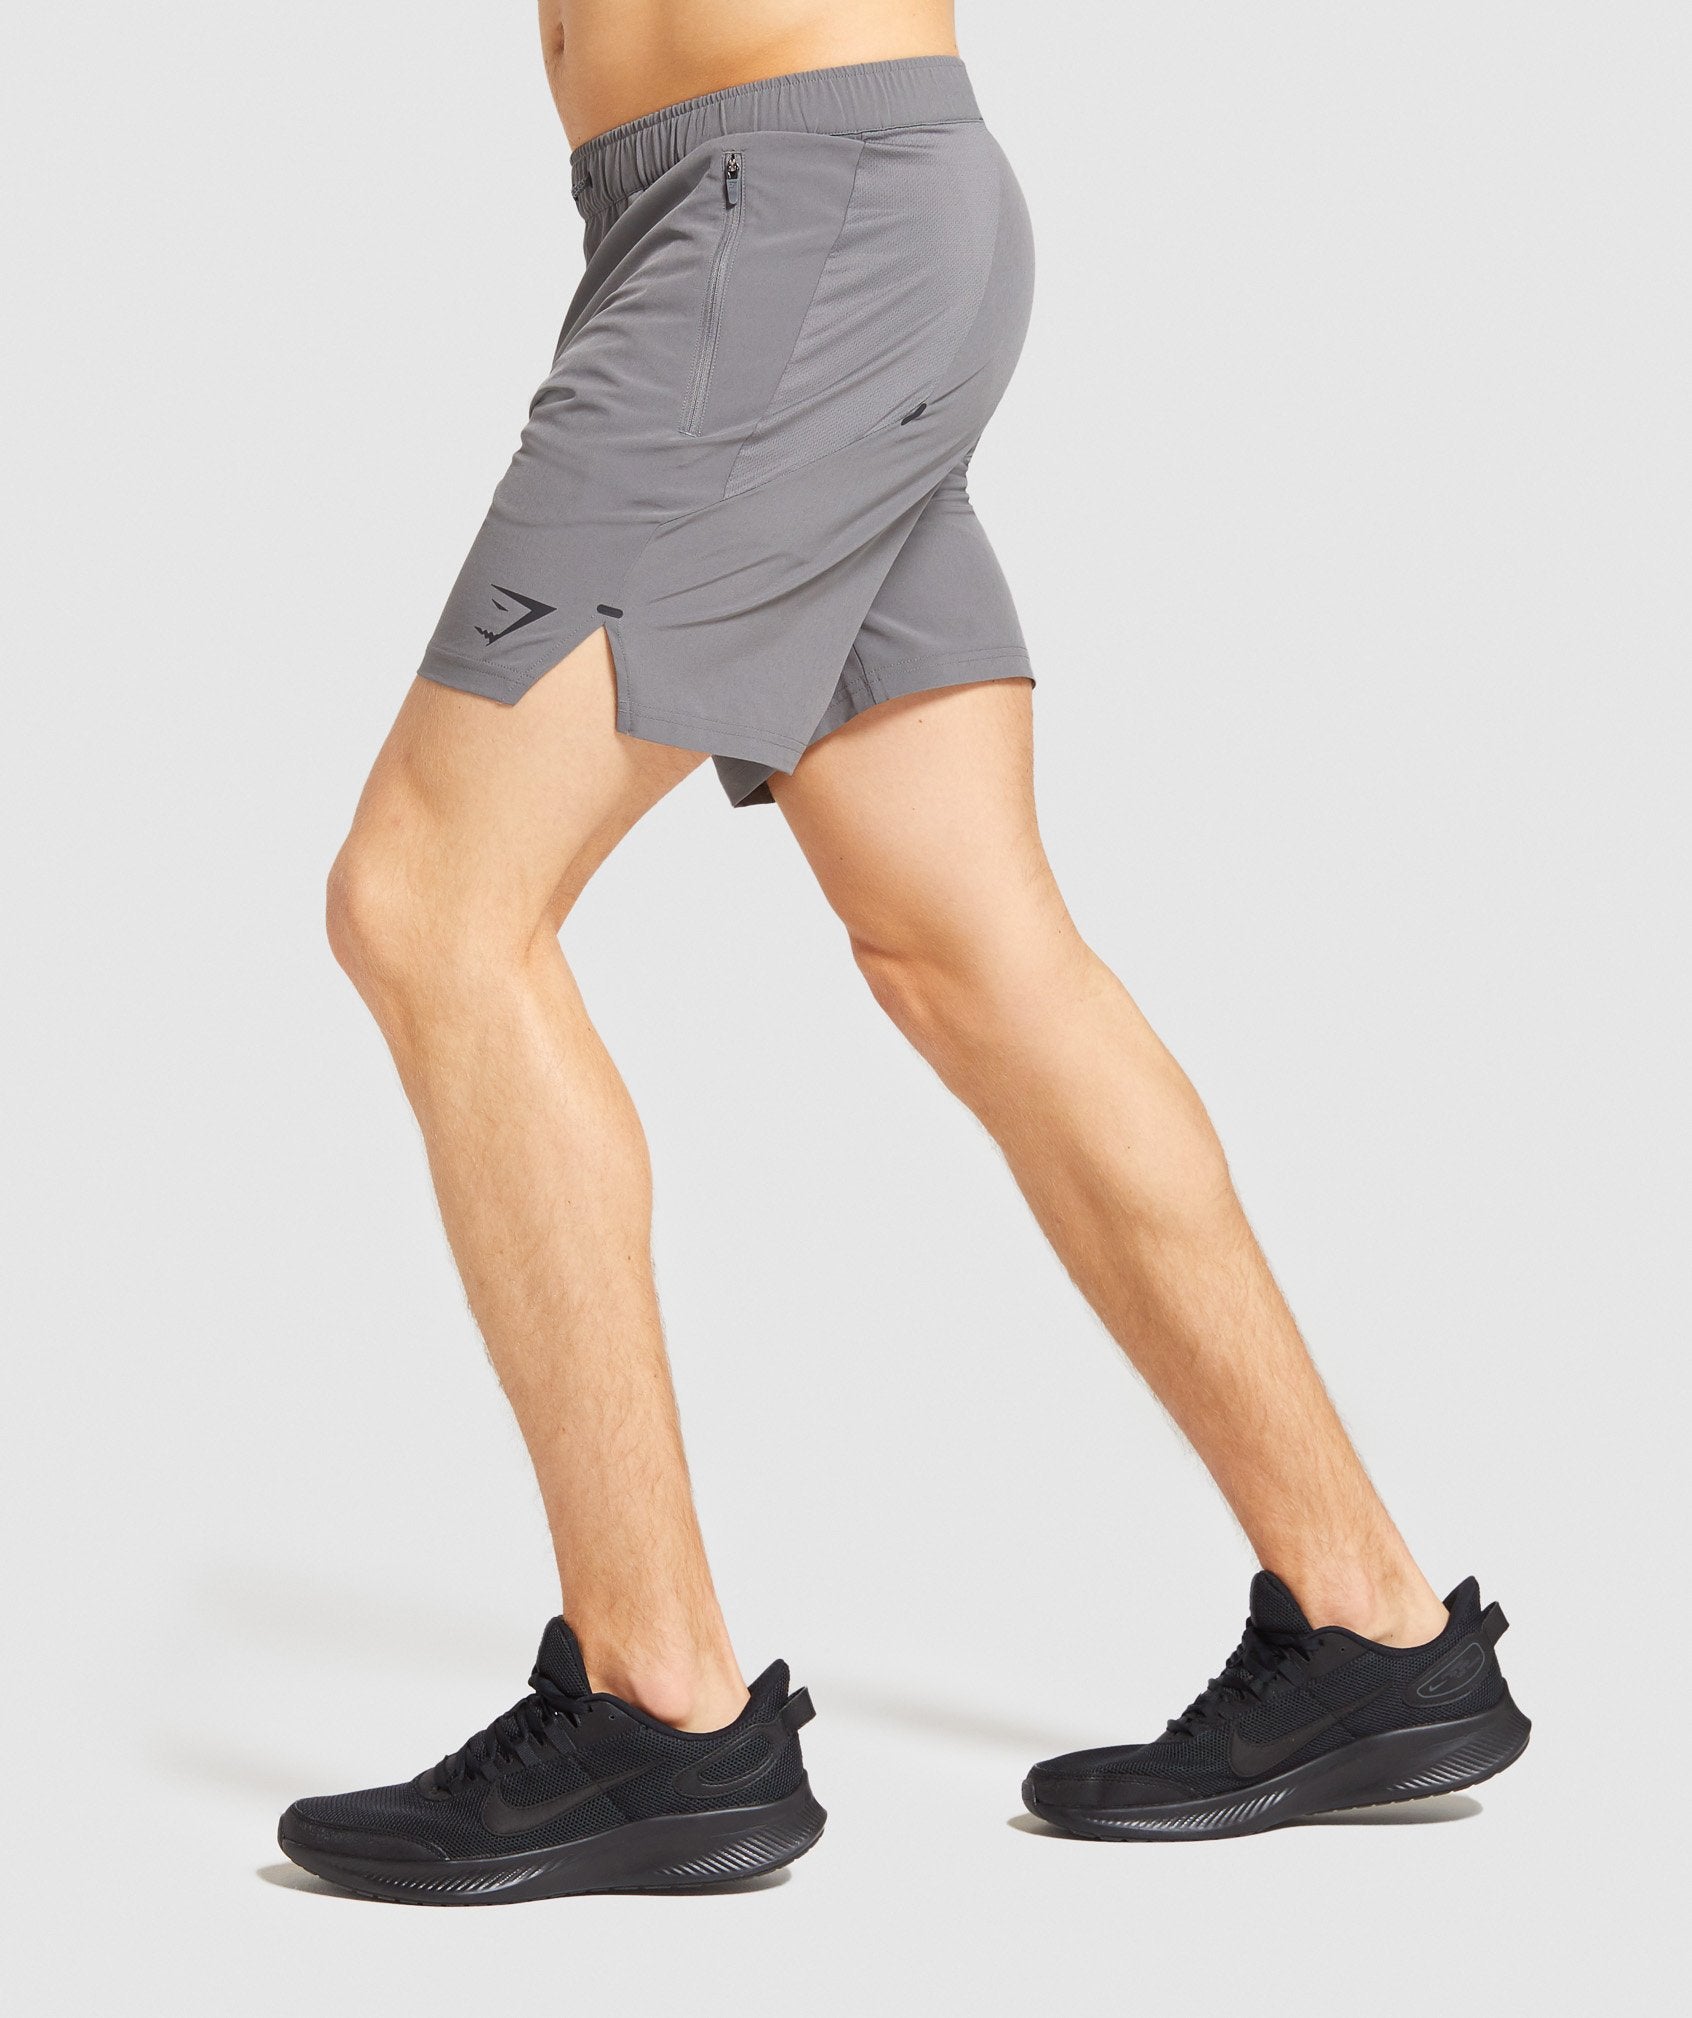 Element Hiit 7" Shorts in Grey - view 3